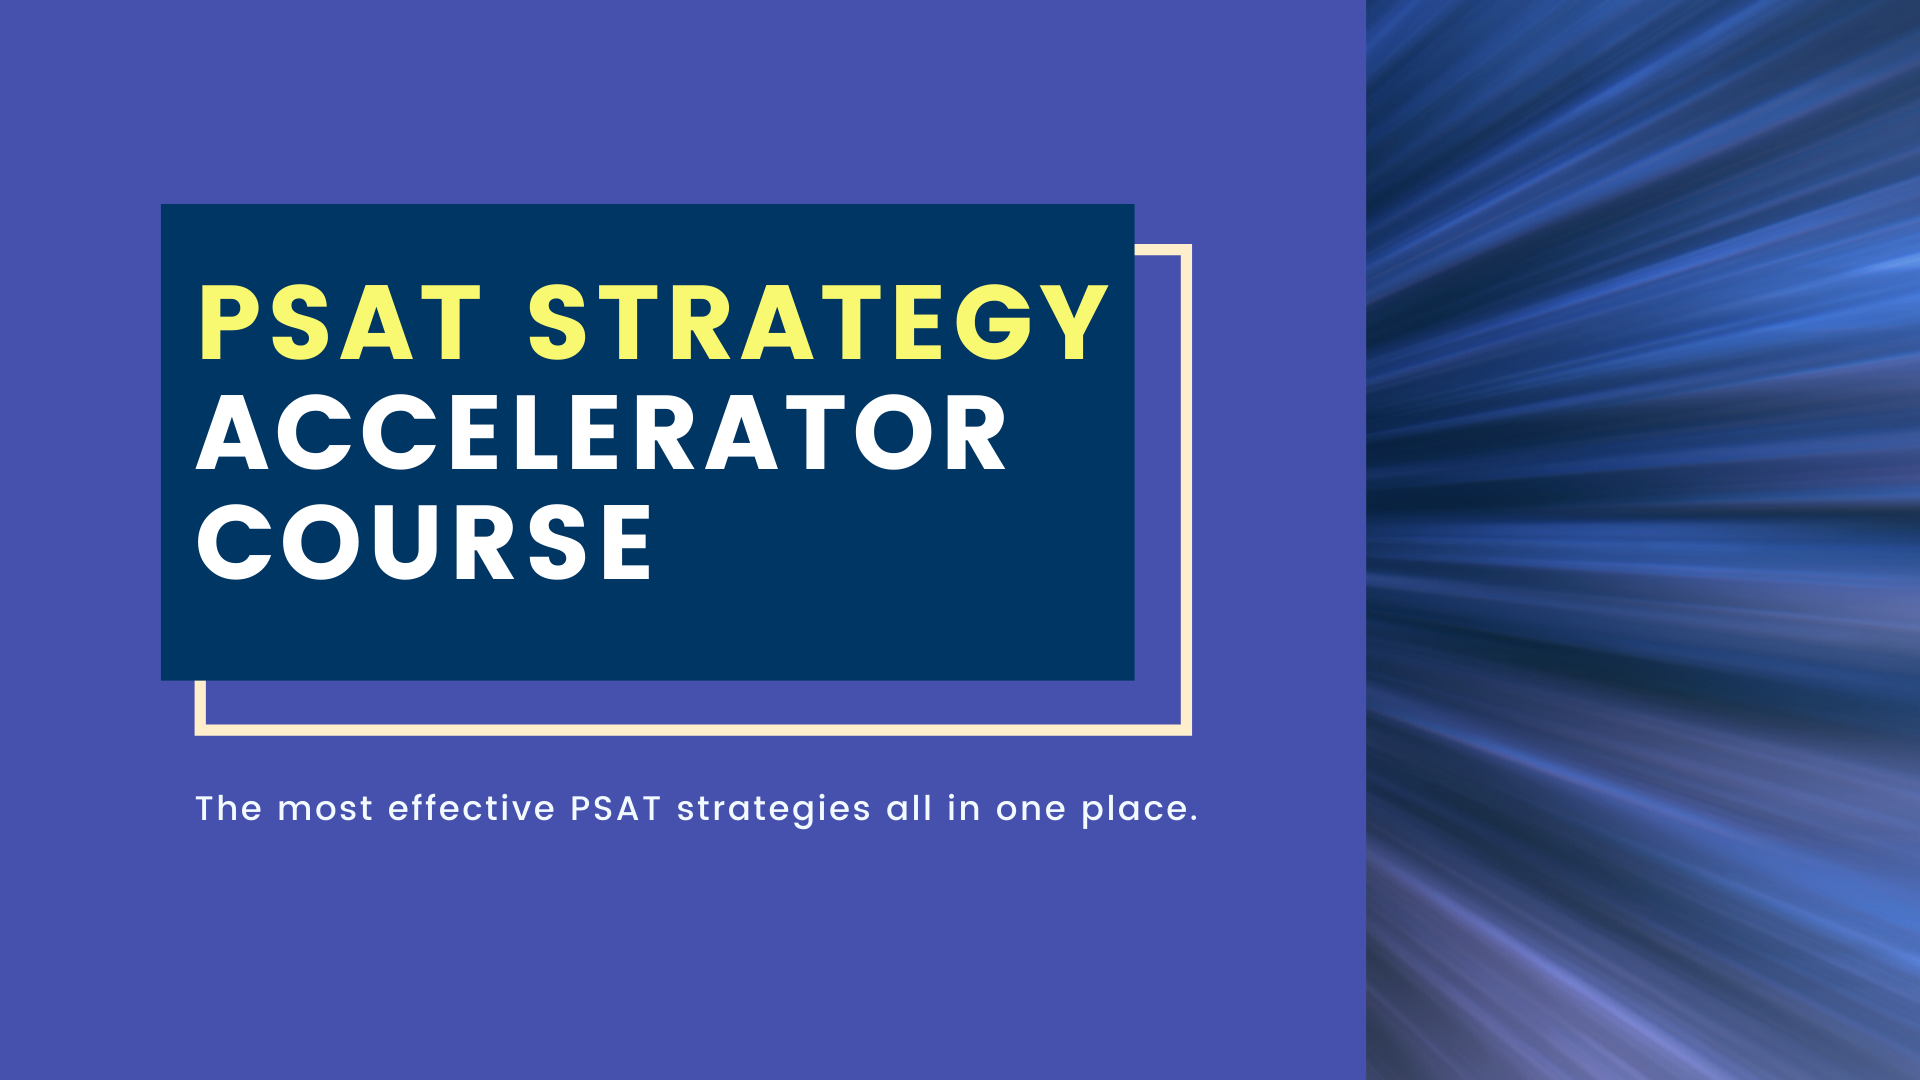 PSAT Strategy Accelerator Course brought to you by Nick the Tutor and Curvebreakers